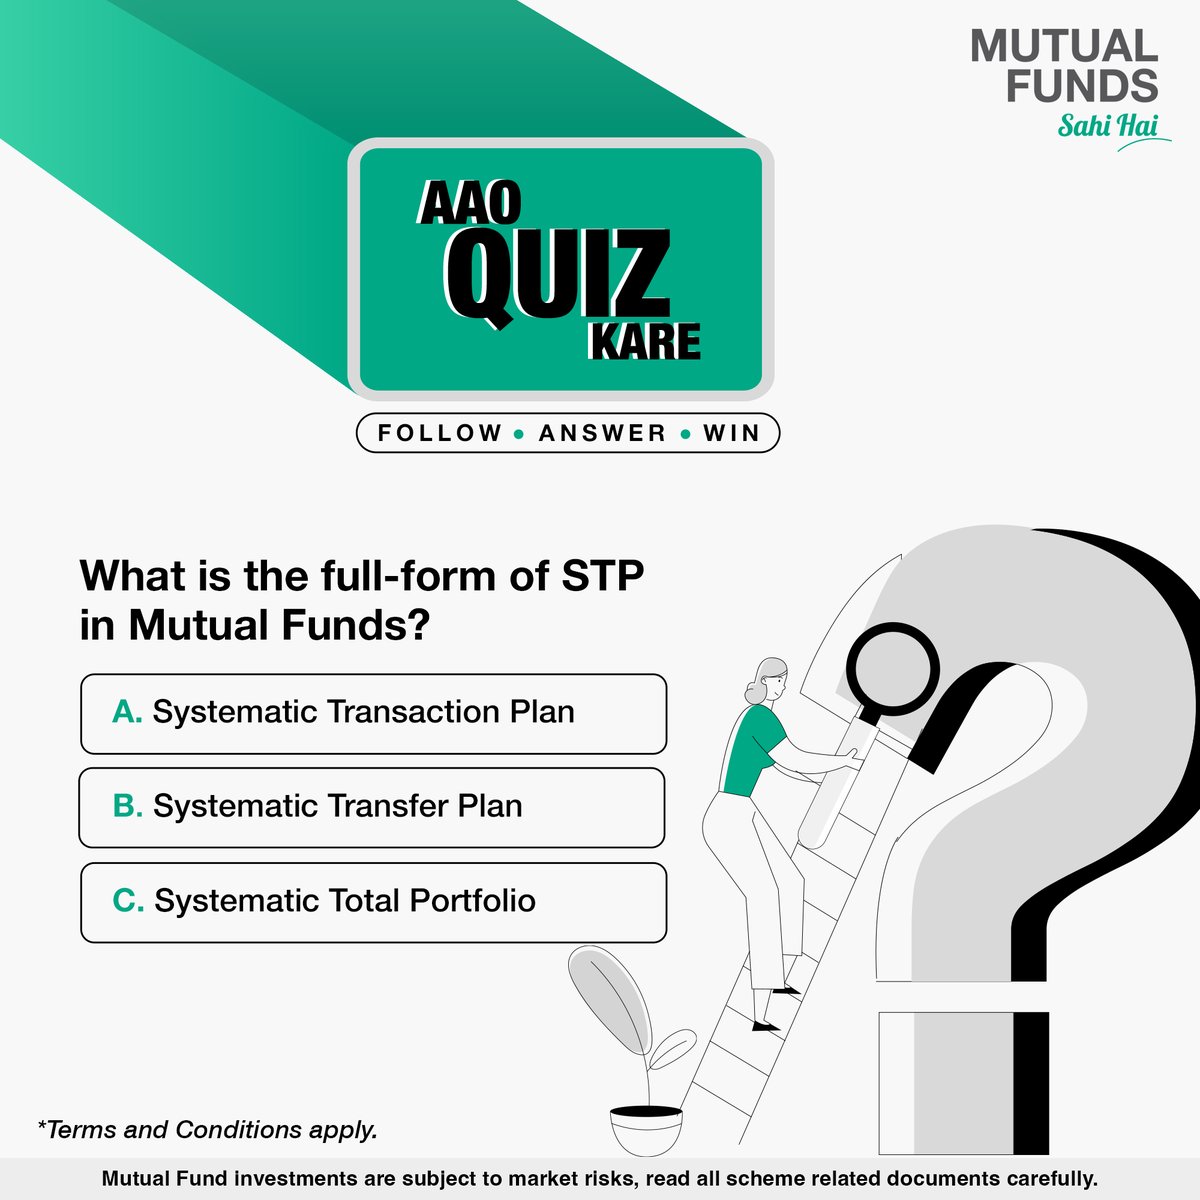 Let’s put your Mutual Funds knowledge to test! Follow us, answer the question correctly, and stand a chance to win gift vouchers. To know More: bit.ly/3SEF8Pl T&C Apply: bit.ly/495q04q #Quiz #MutualFundsSahiHai #AaoQuizKare #ContestAlert